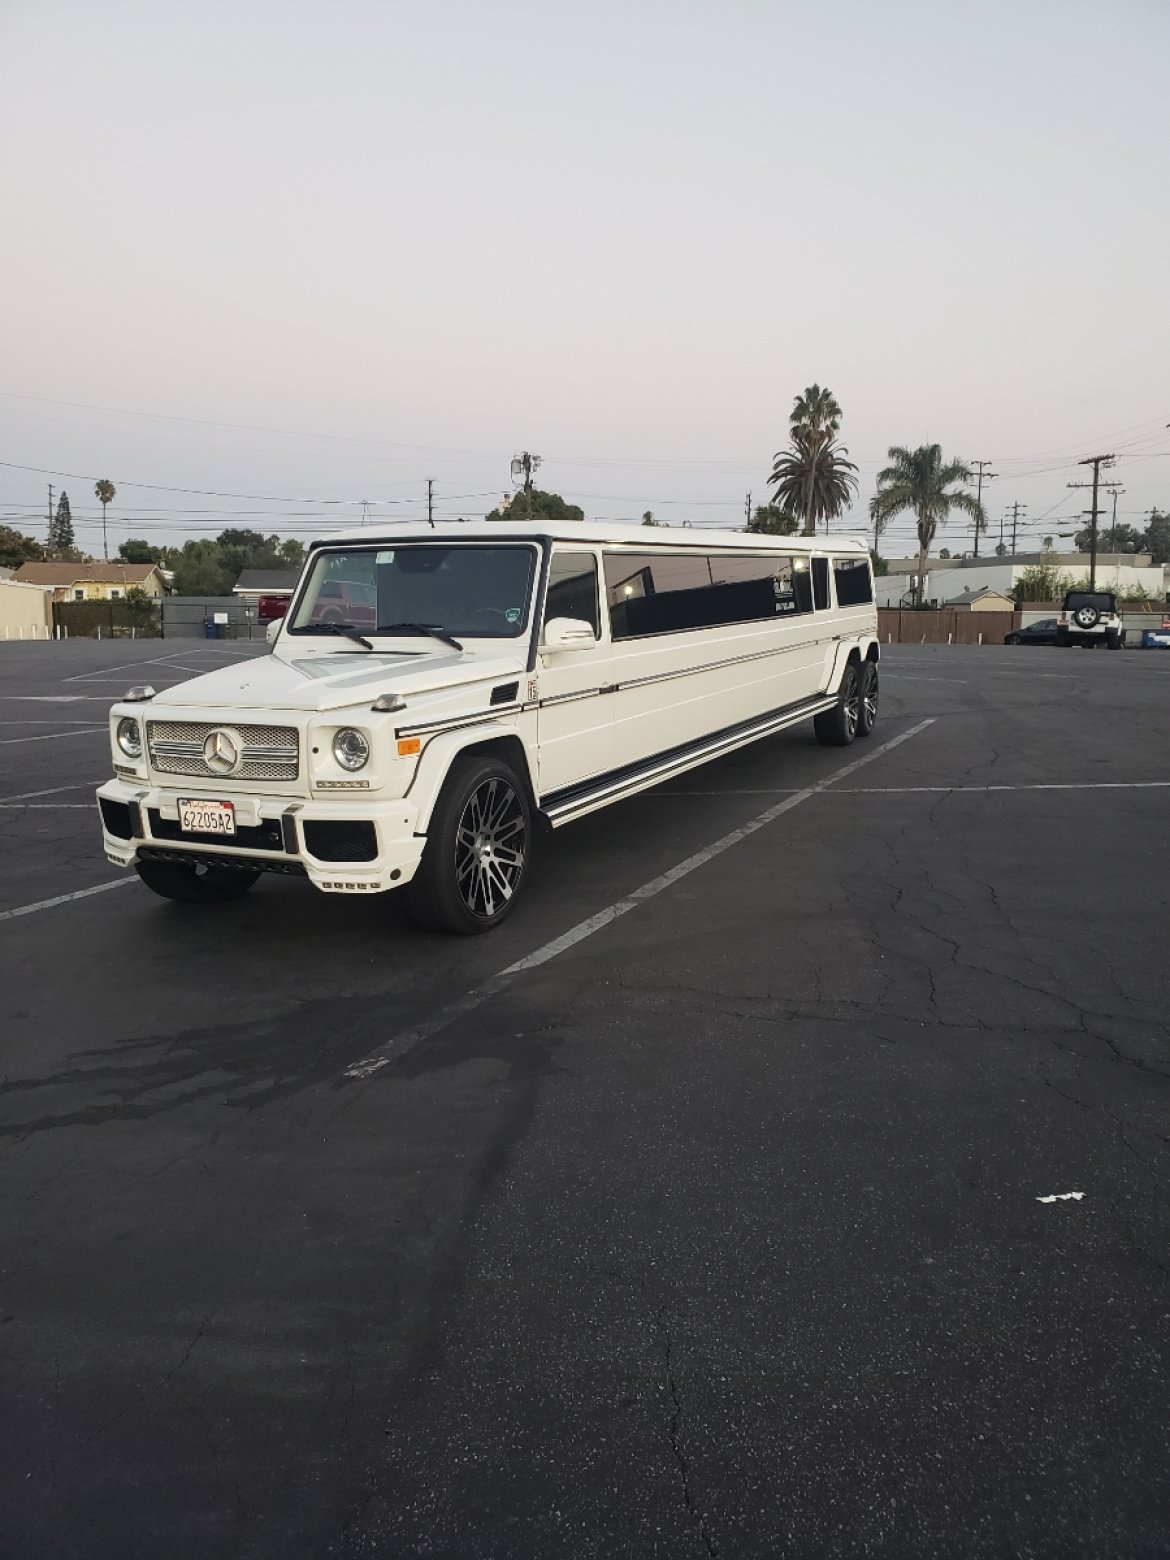 SUV Stretch for sale: 2008 Mercedes-Benz G500 39&quot; by LimosbyMoonlight